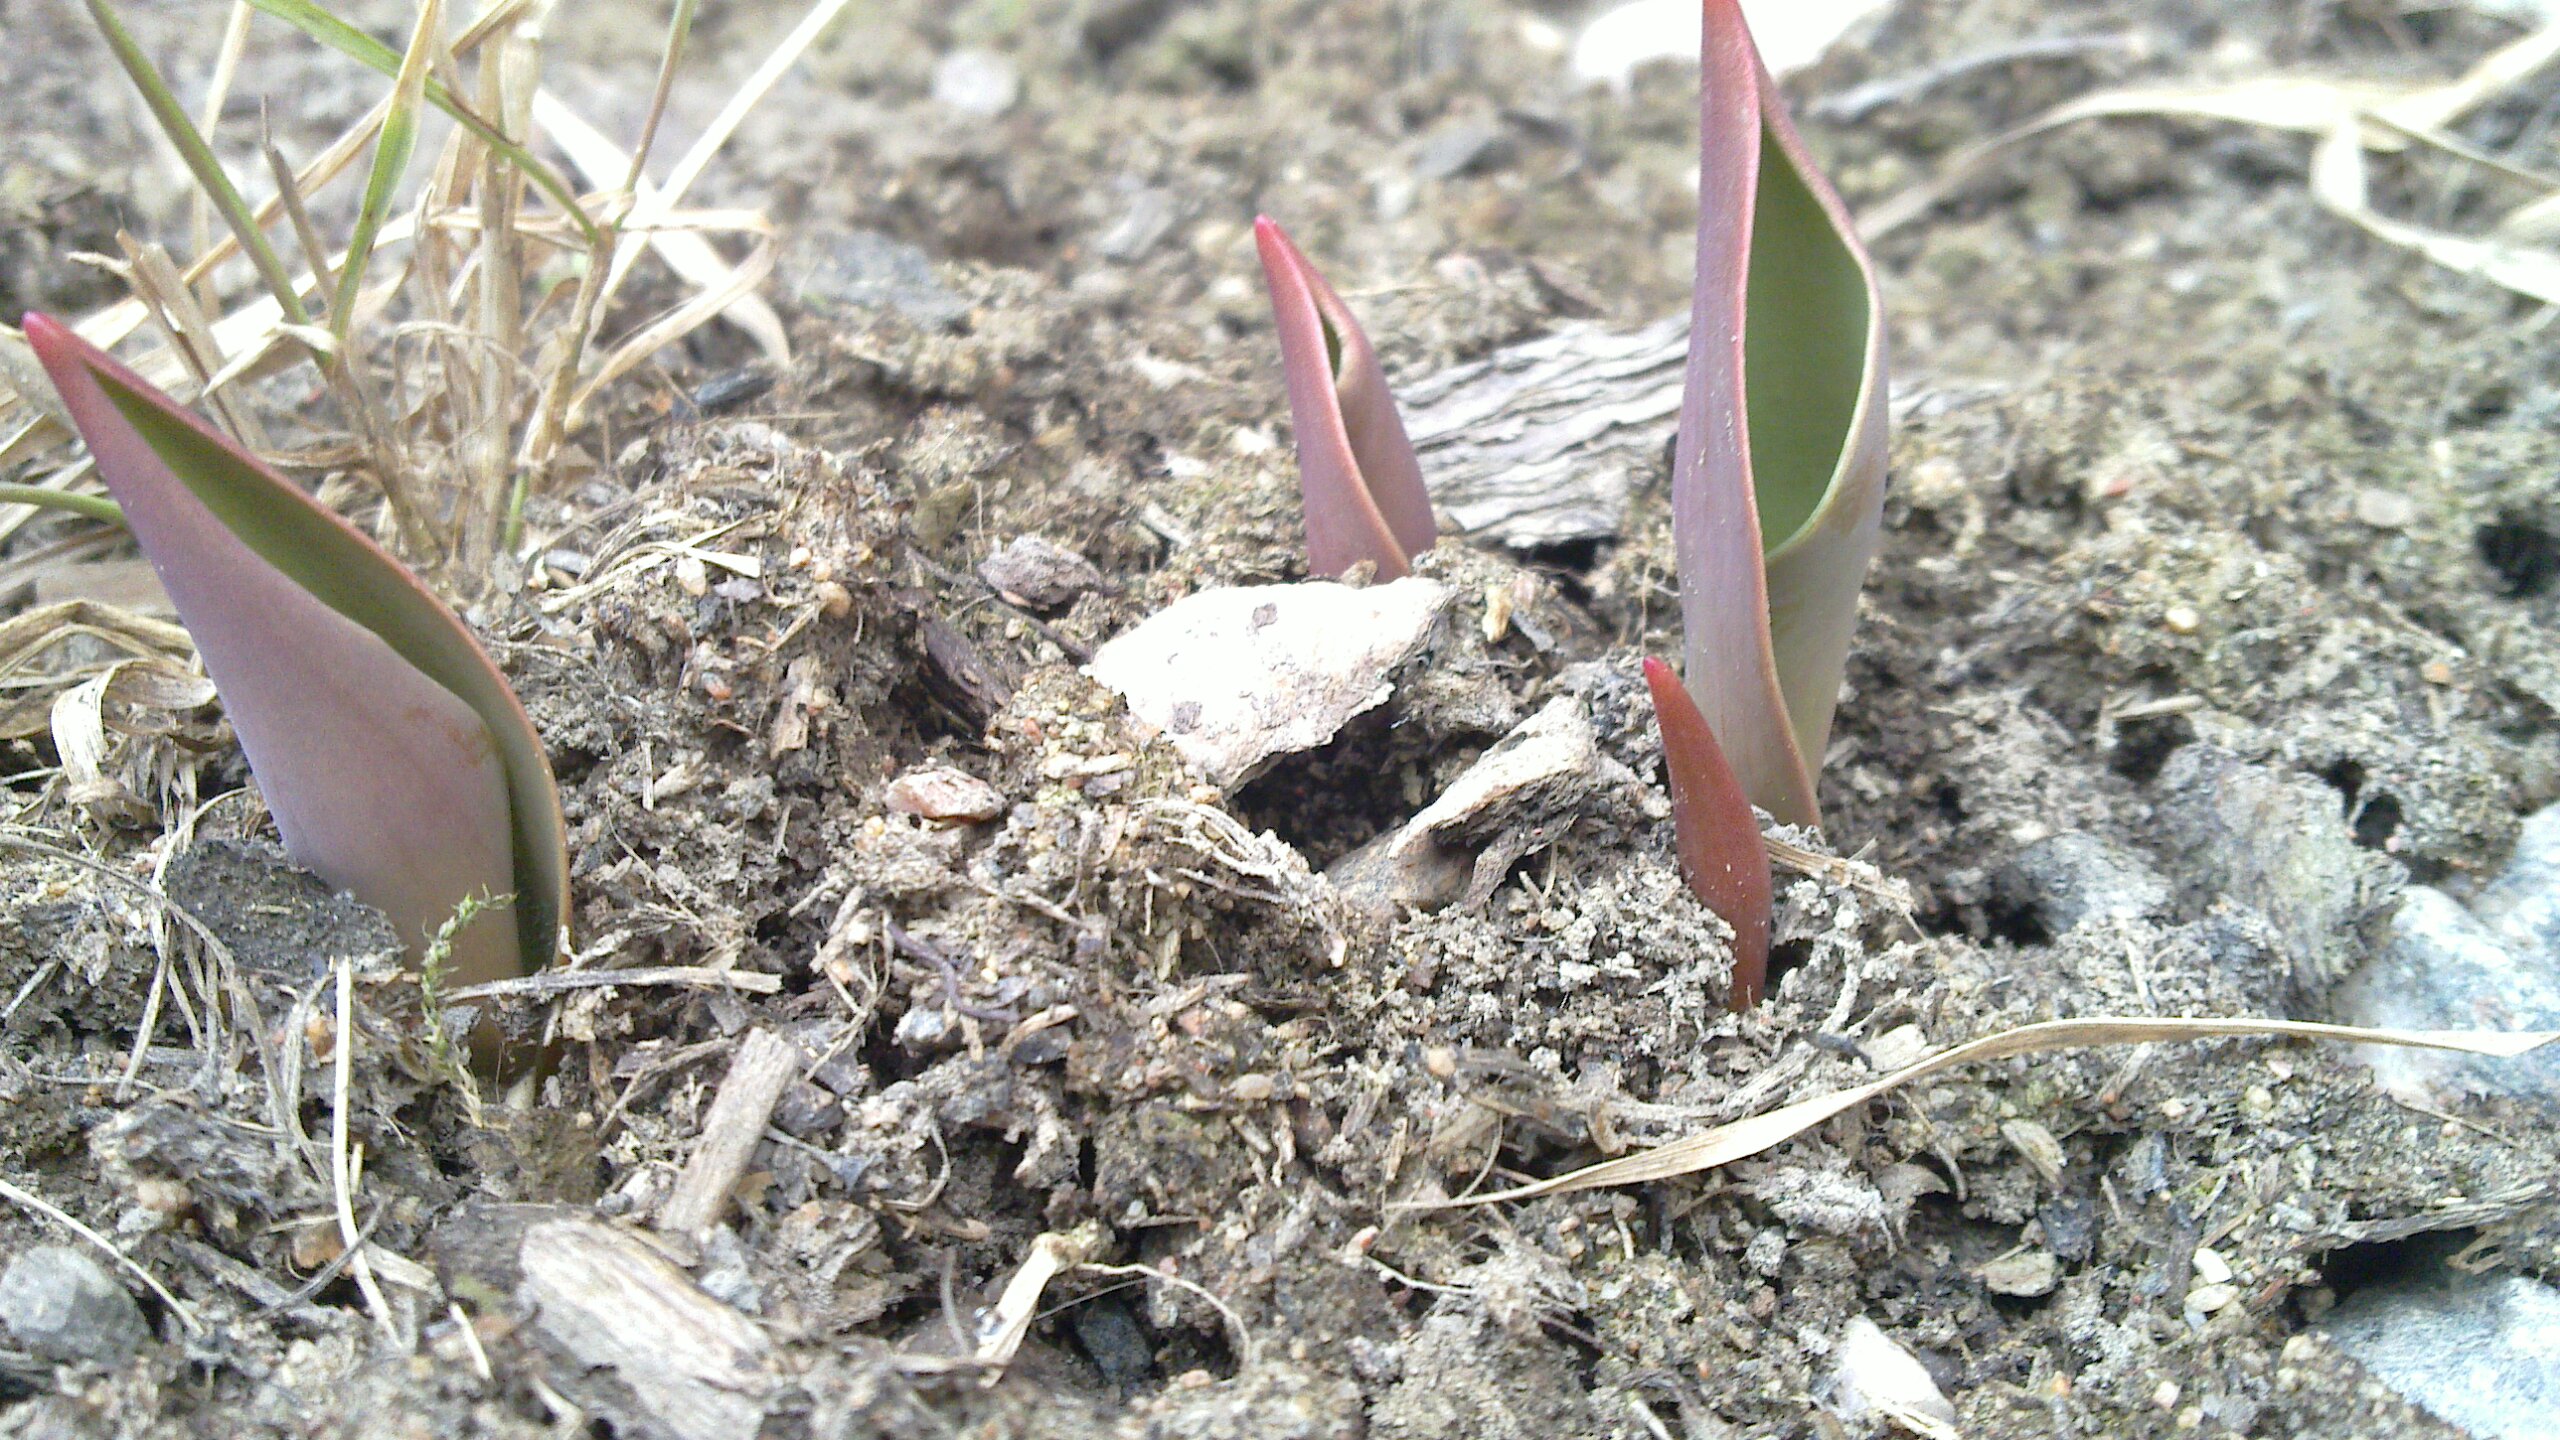 some very small plants are poking up out of the soil